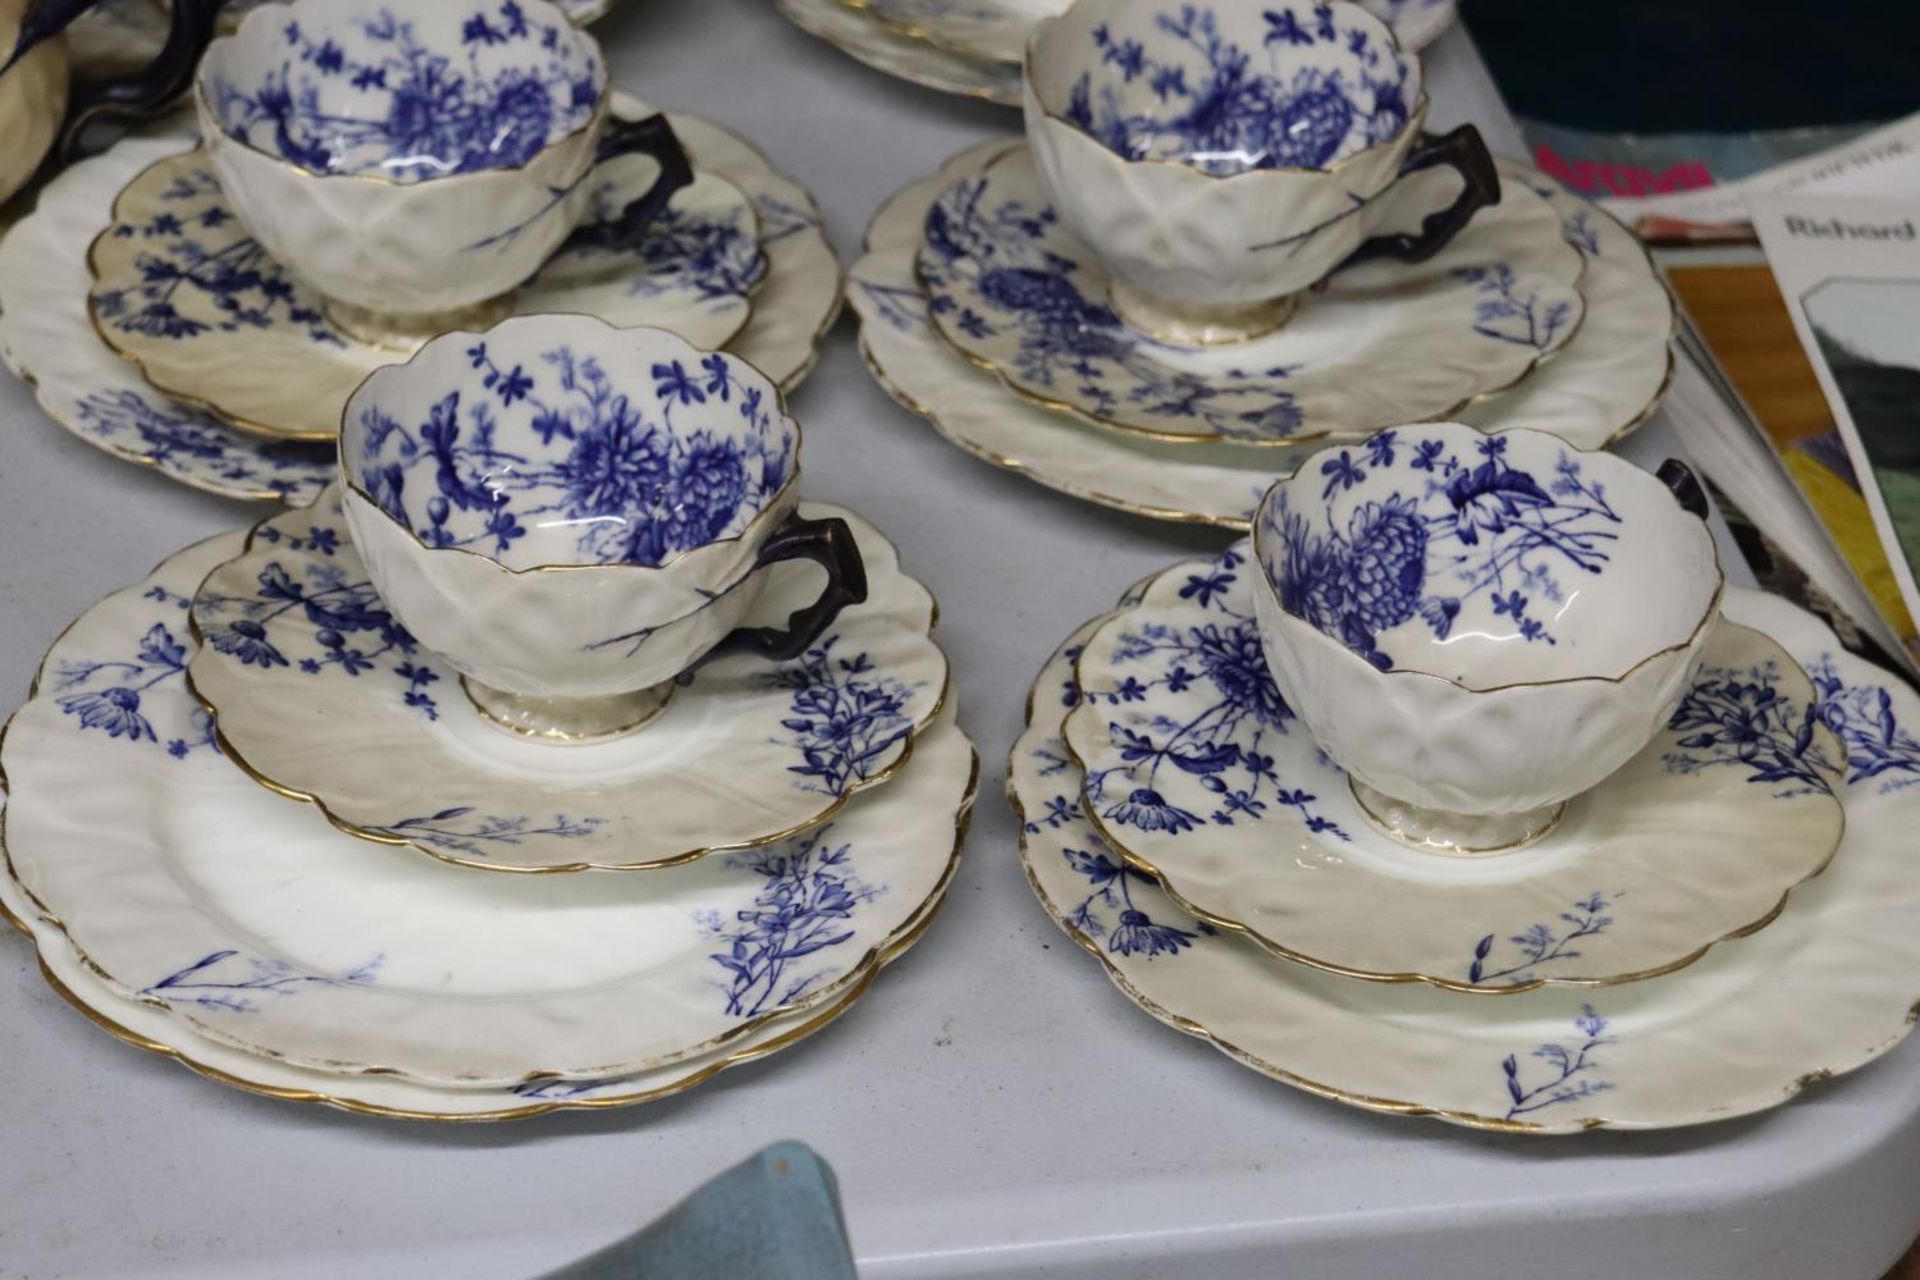 A VINTAGE CHINA TEASET SET, WITH BLUE AND WHITE PATTERN AND FLUTED EDGES, TO INCLUDE CAKE PLATES, - Image 2 of 5